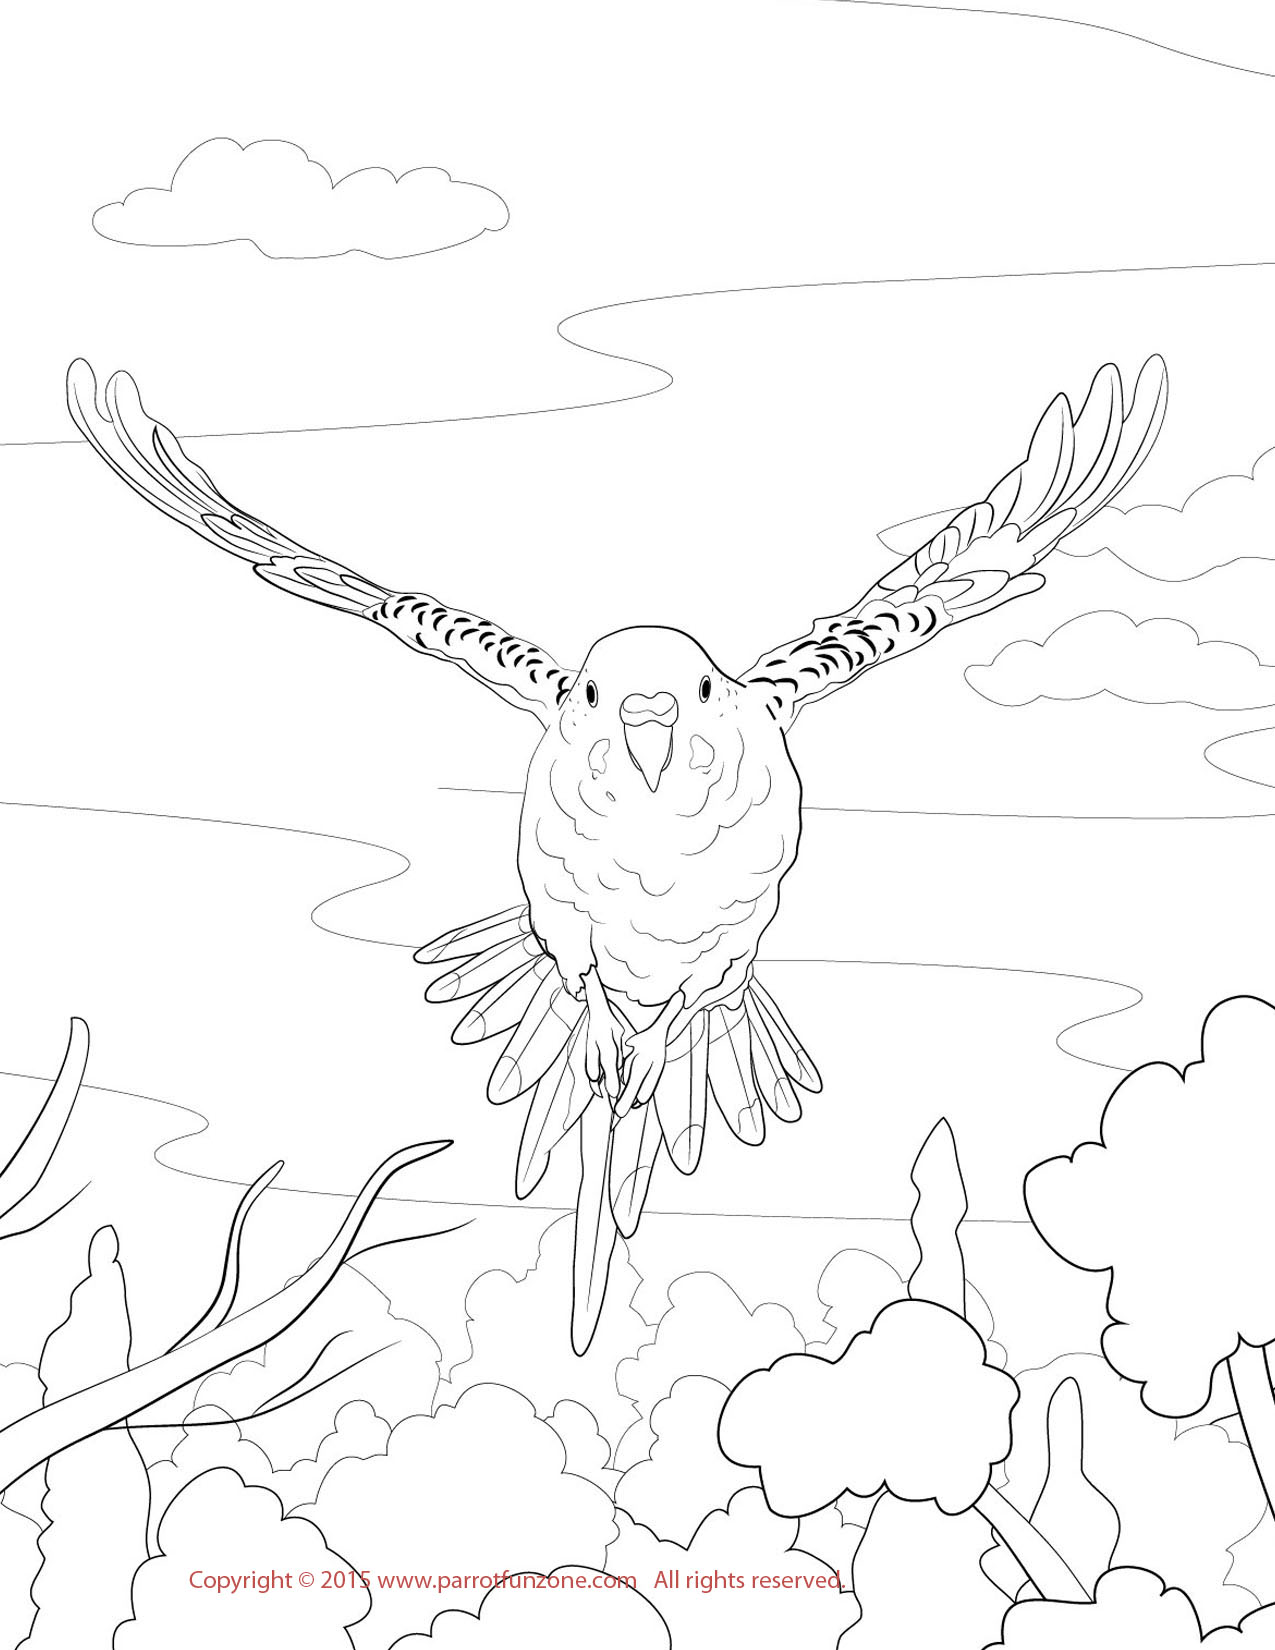 Budgie coloring #17, Download drawings